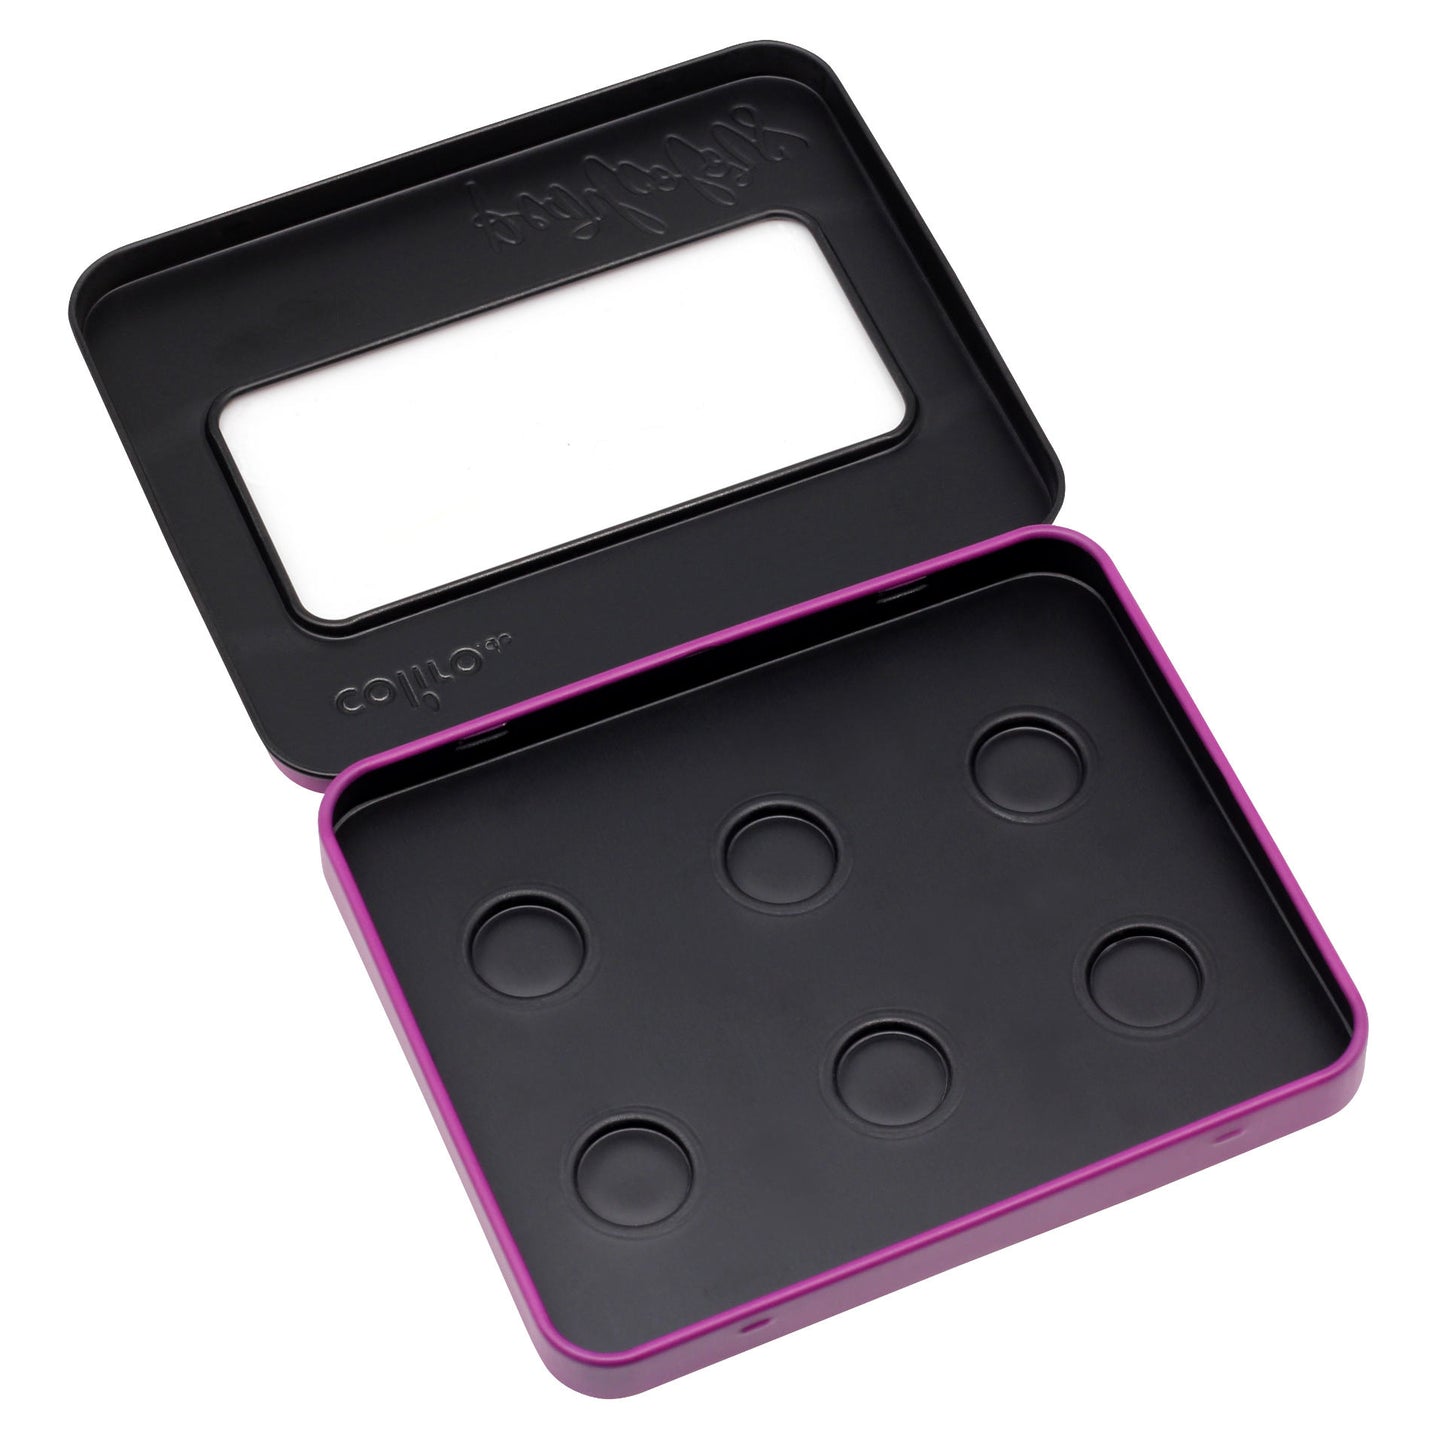 Metal box for 6 colors with purple window